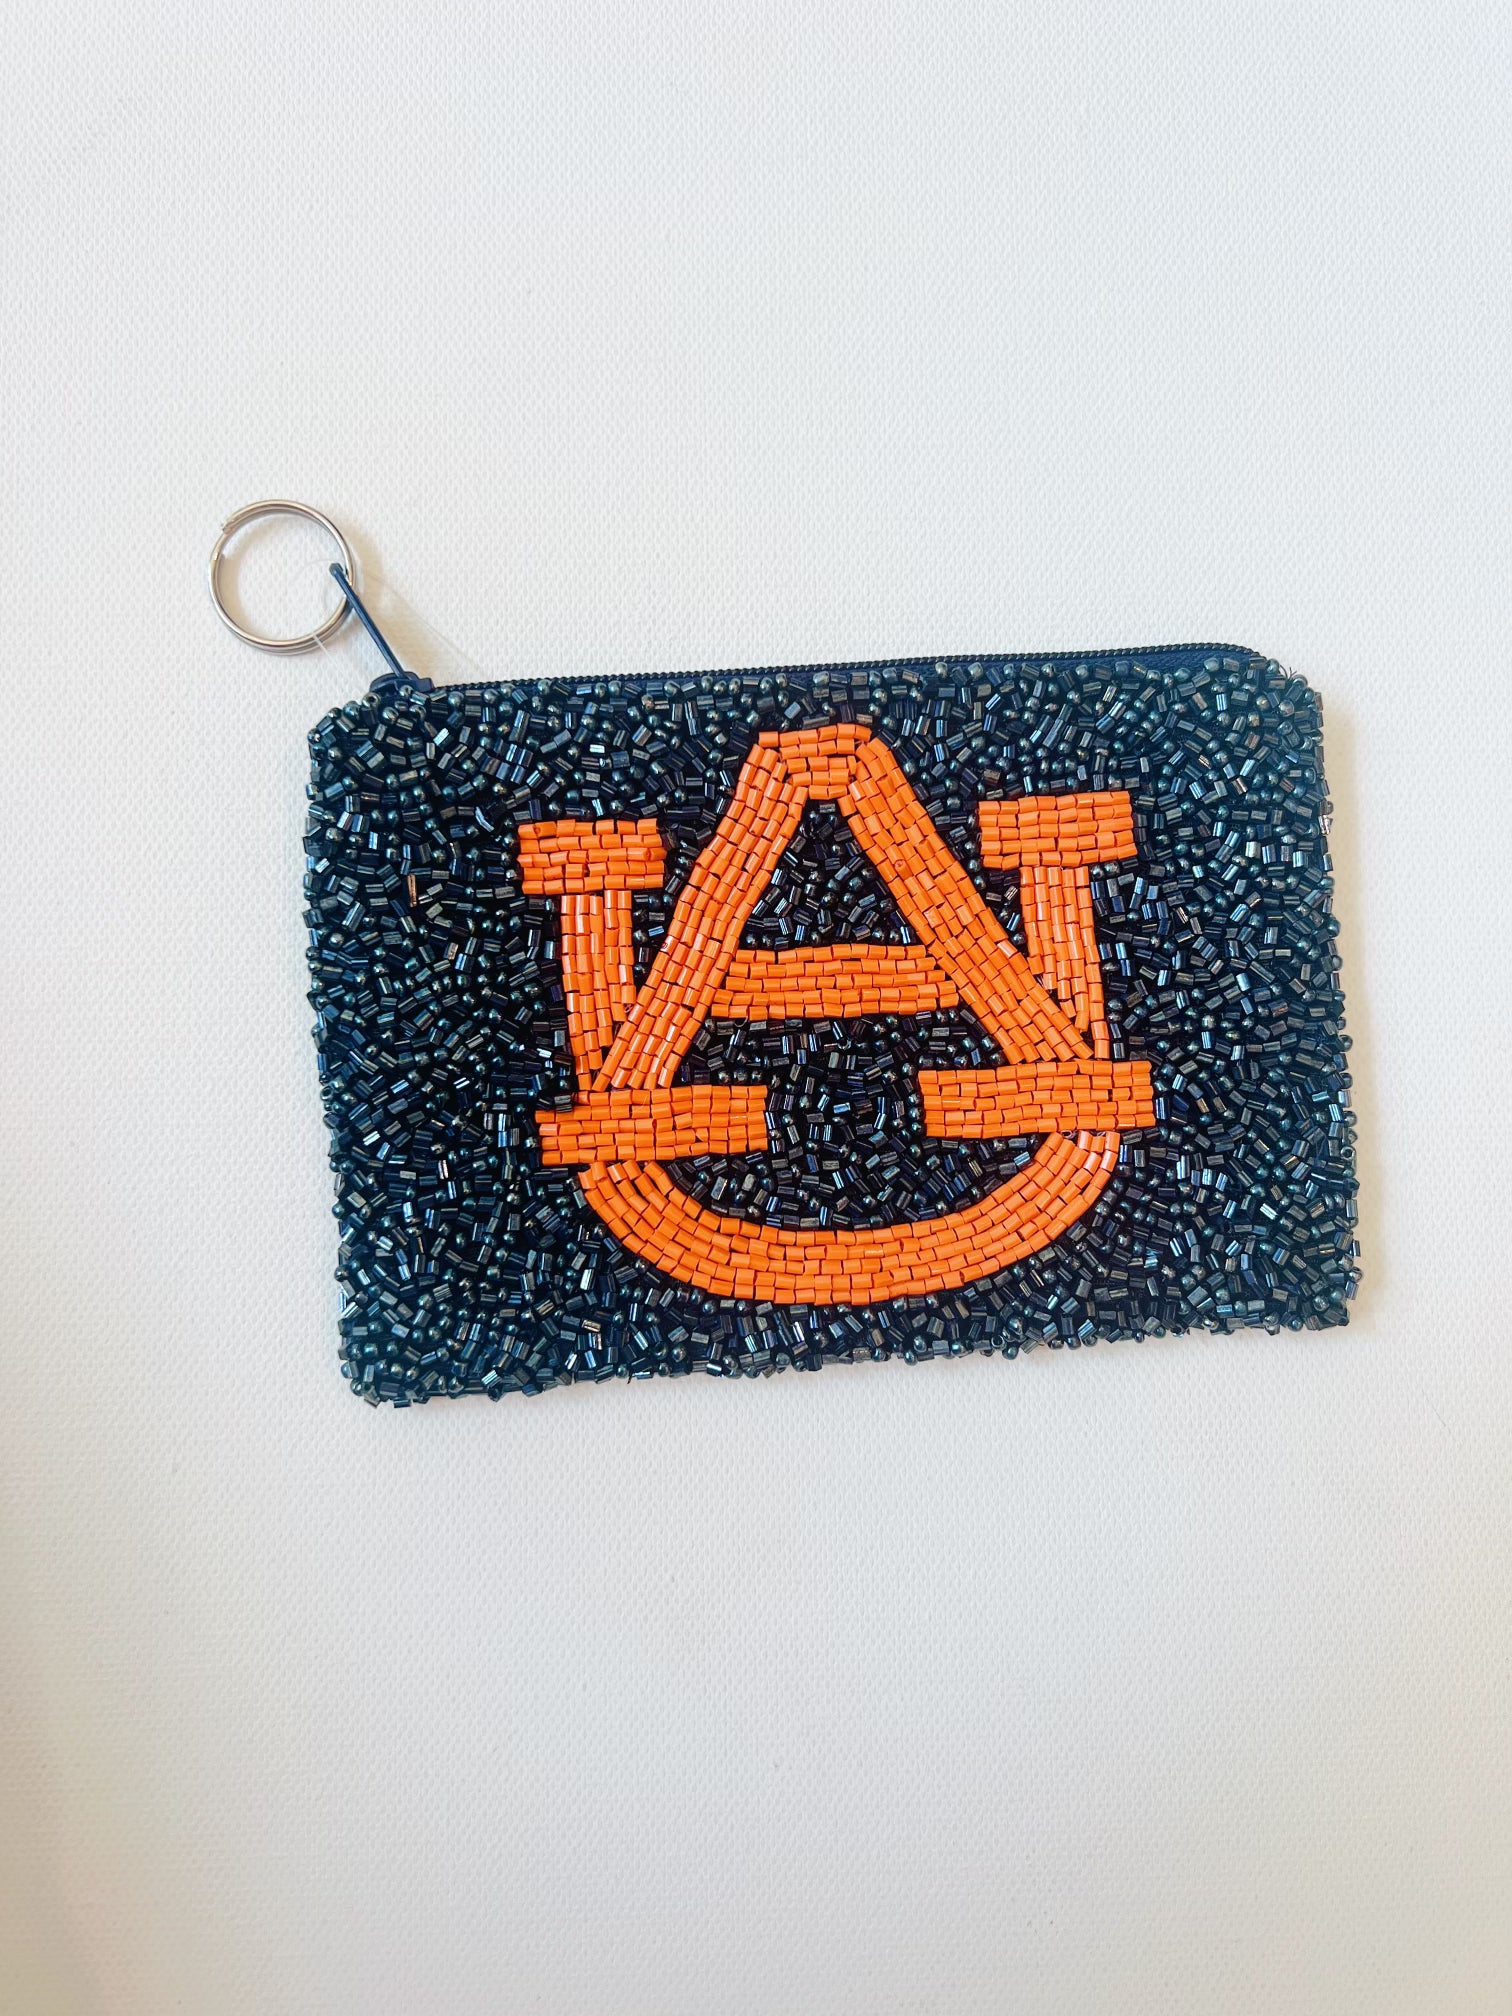 Game Day Coin Purse